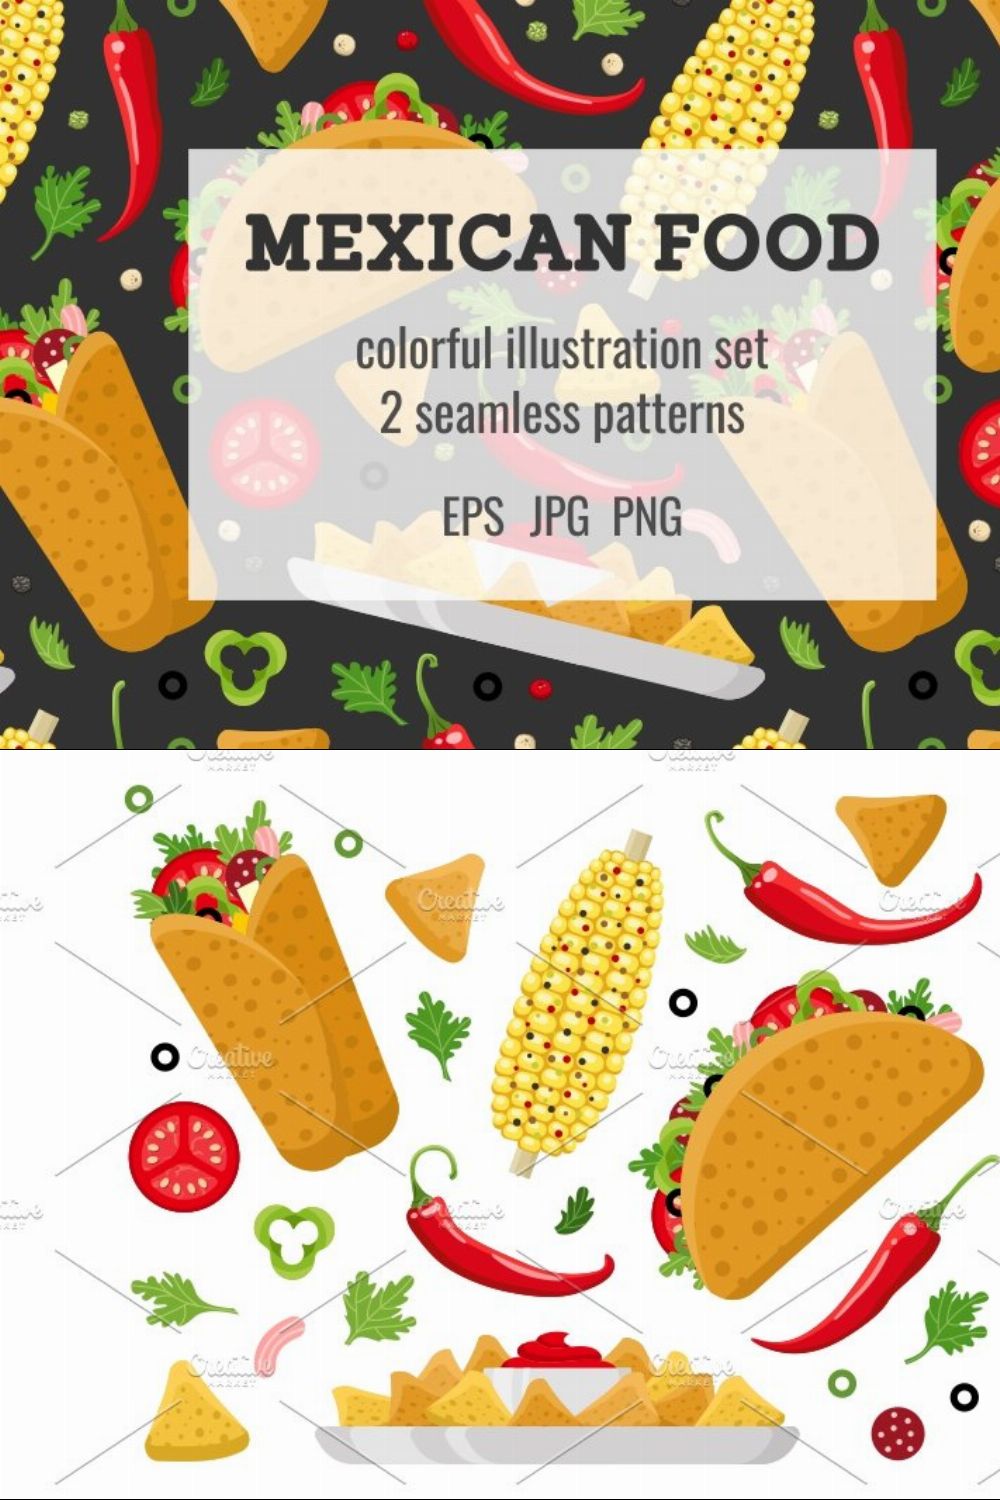 Mexican food set and patterns pinterest preview image.